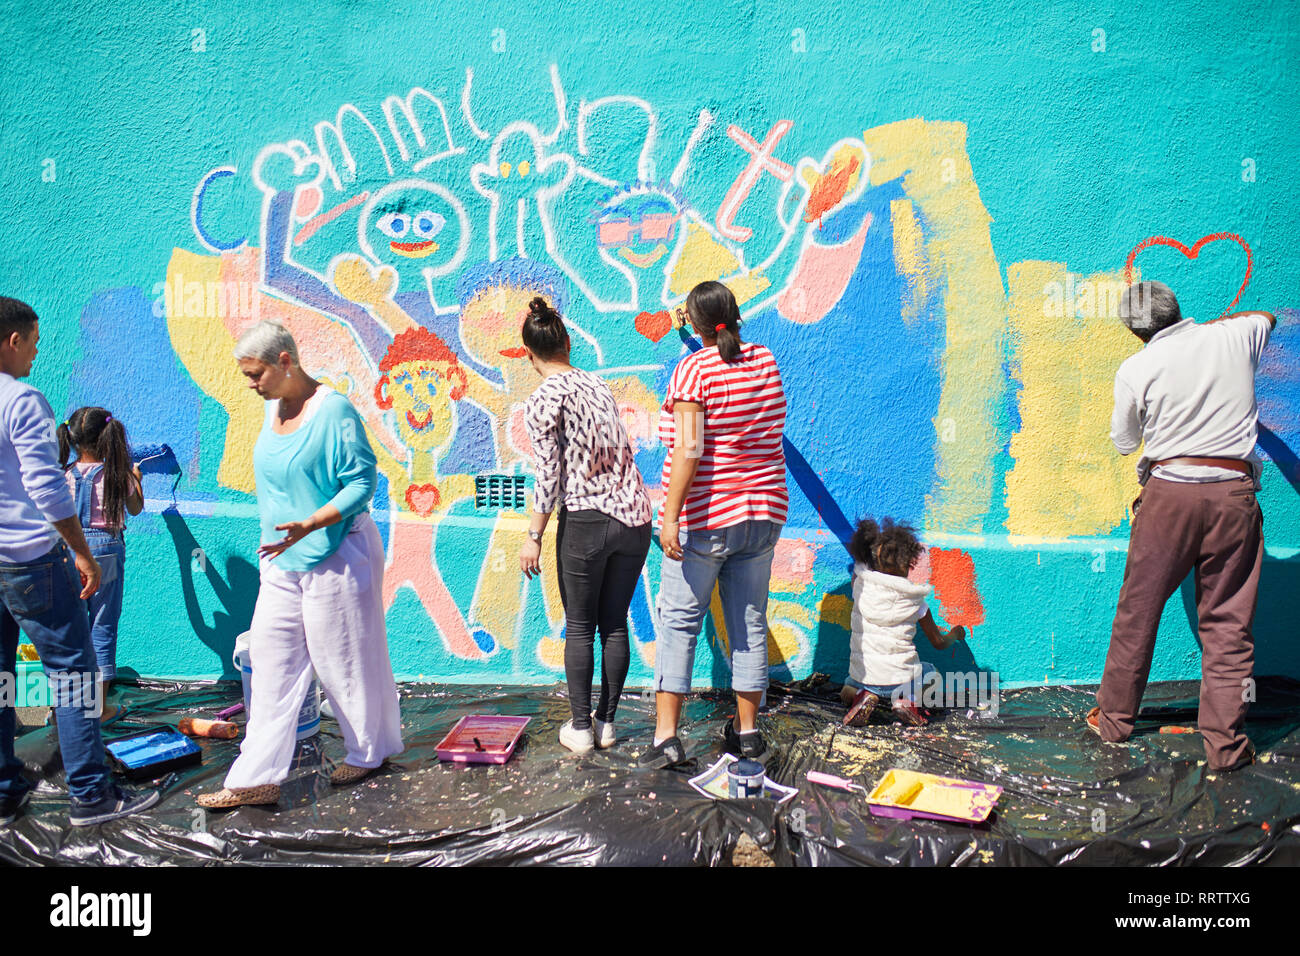 Community volunteers painting vibrant mural on sunny wall Stock Photo